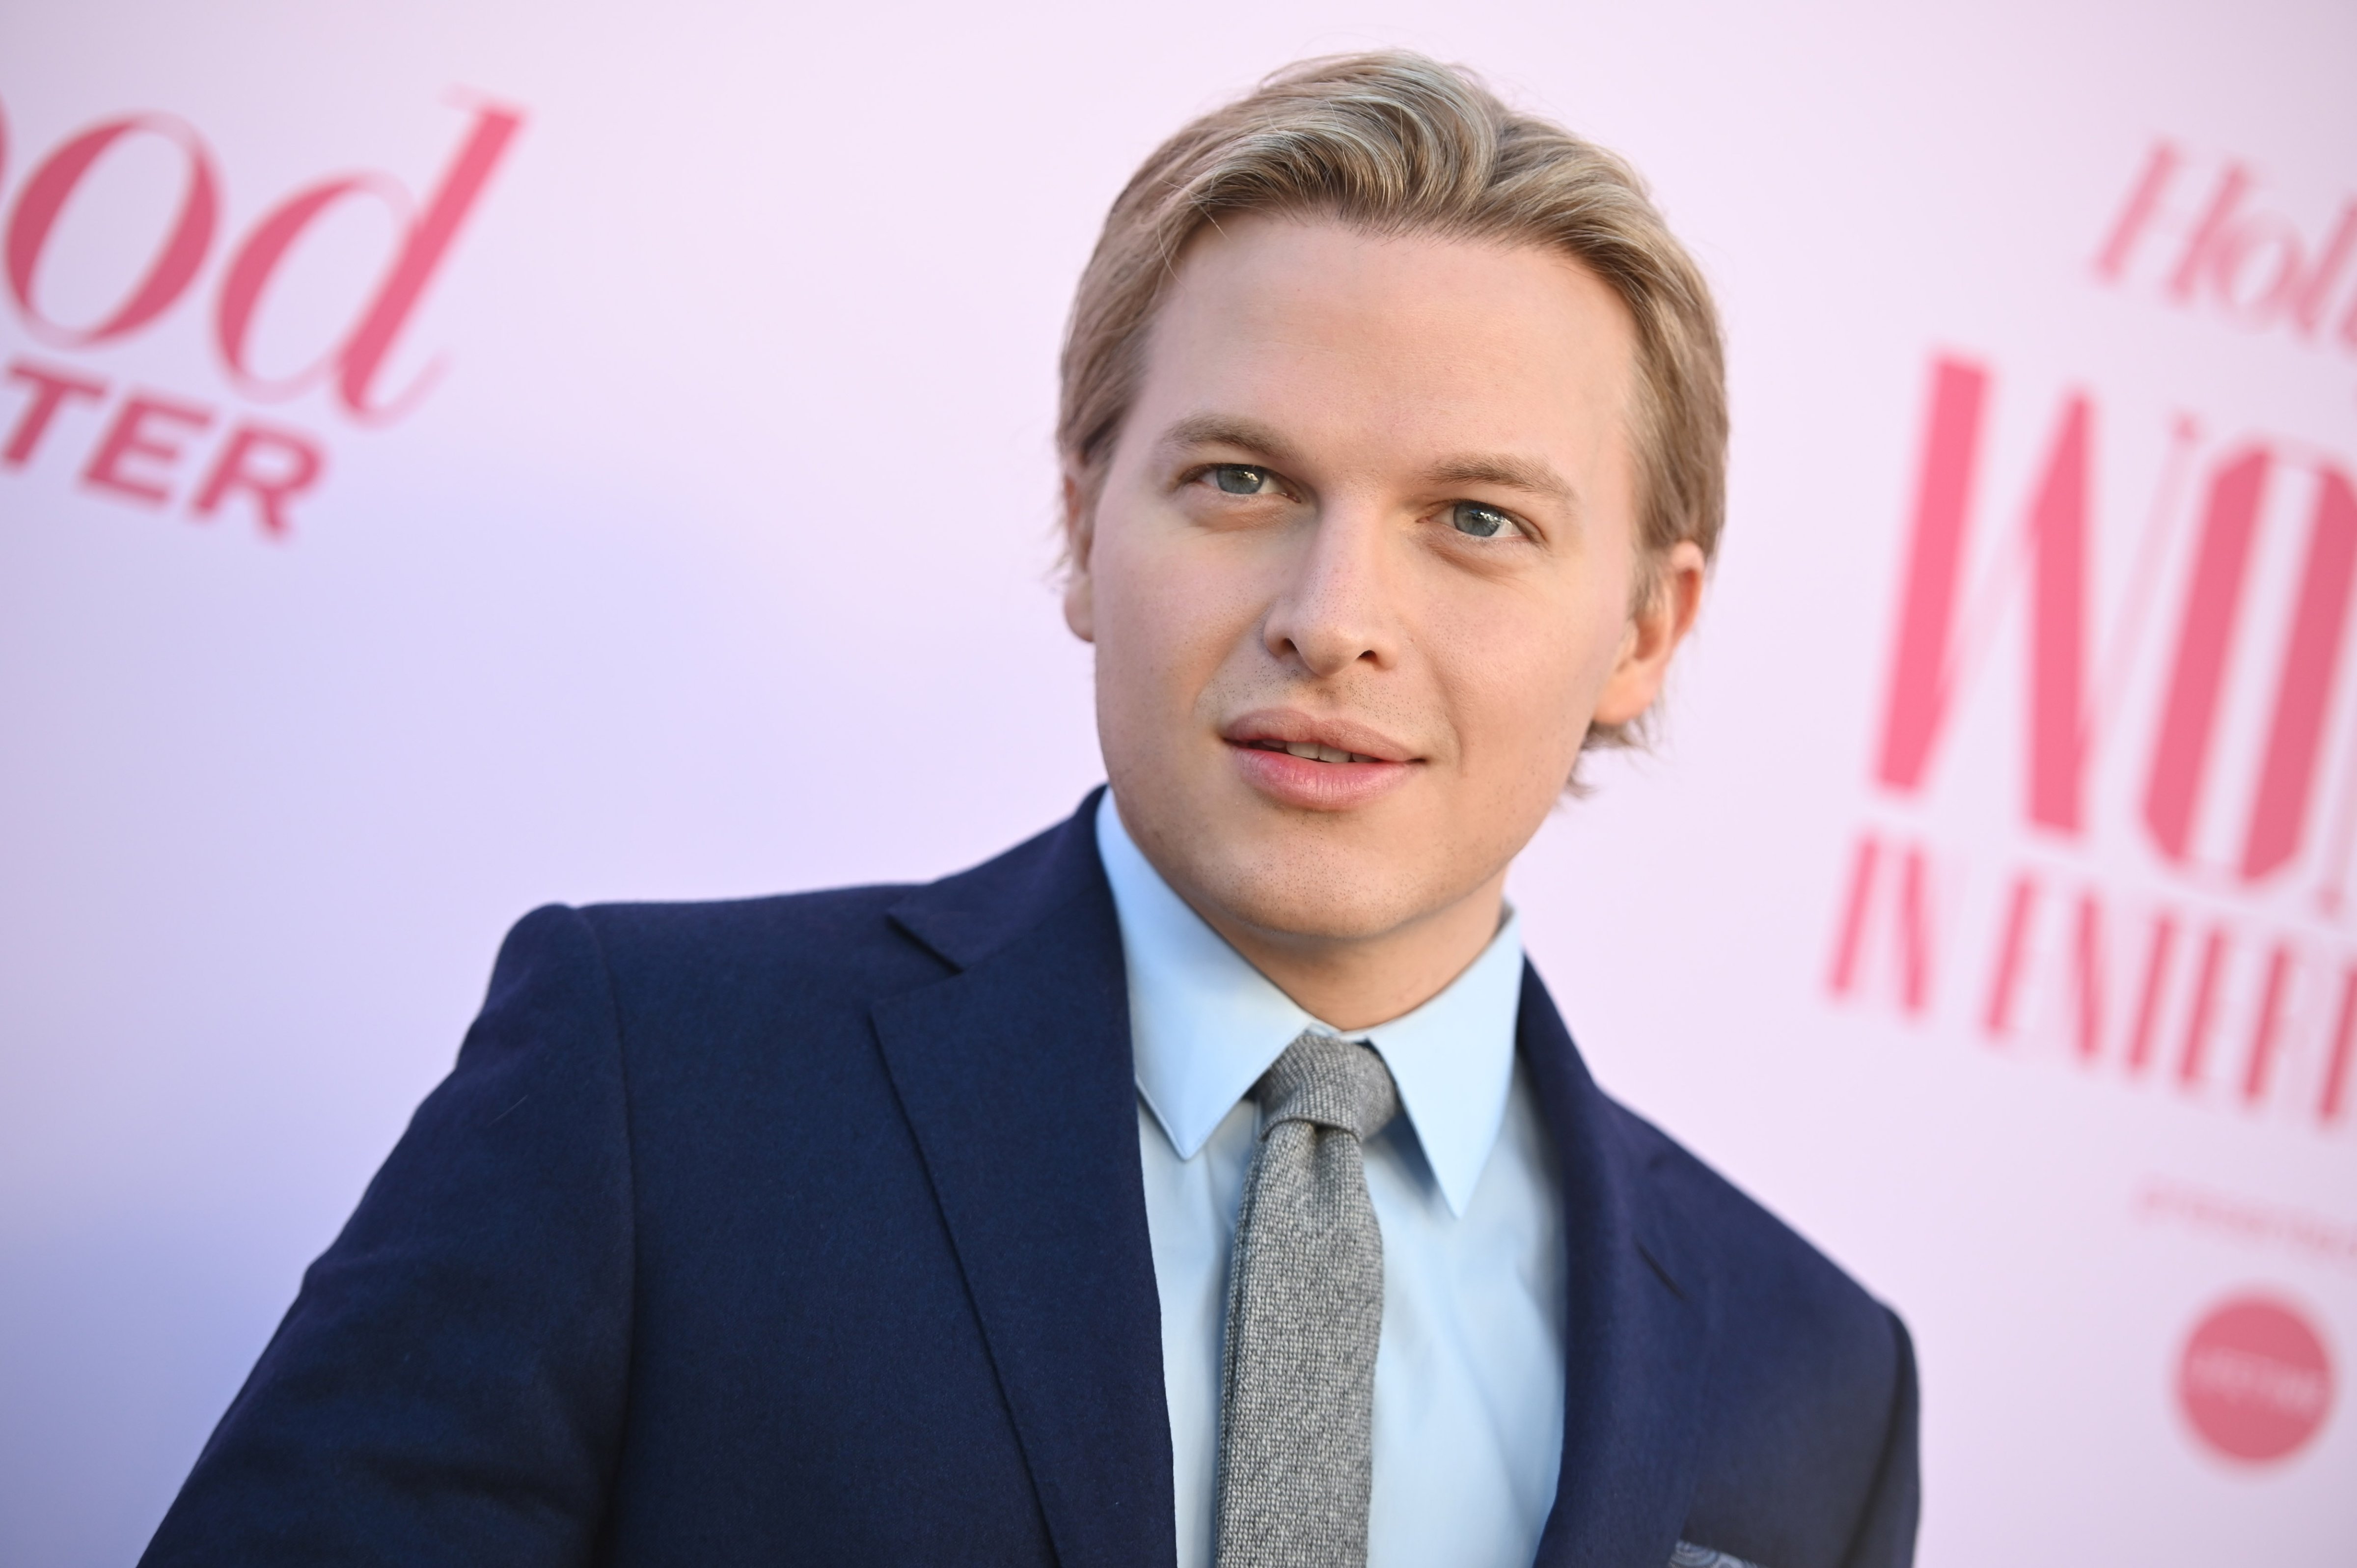 Journalist Ronan Farrow attends the Hollywood Reporter's annual Women in Entertainment Breakfast Gala, on Dec. 11, 2019 at Milk Studios in Hollywood, California. (Robyn Beck—AFP/ Getty Images)